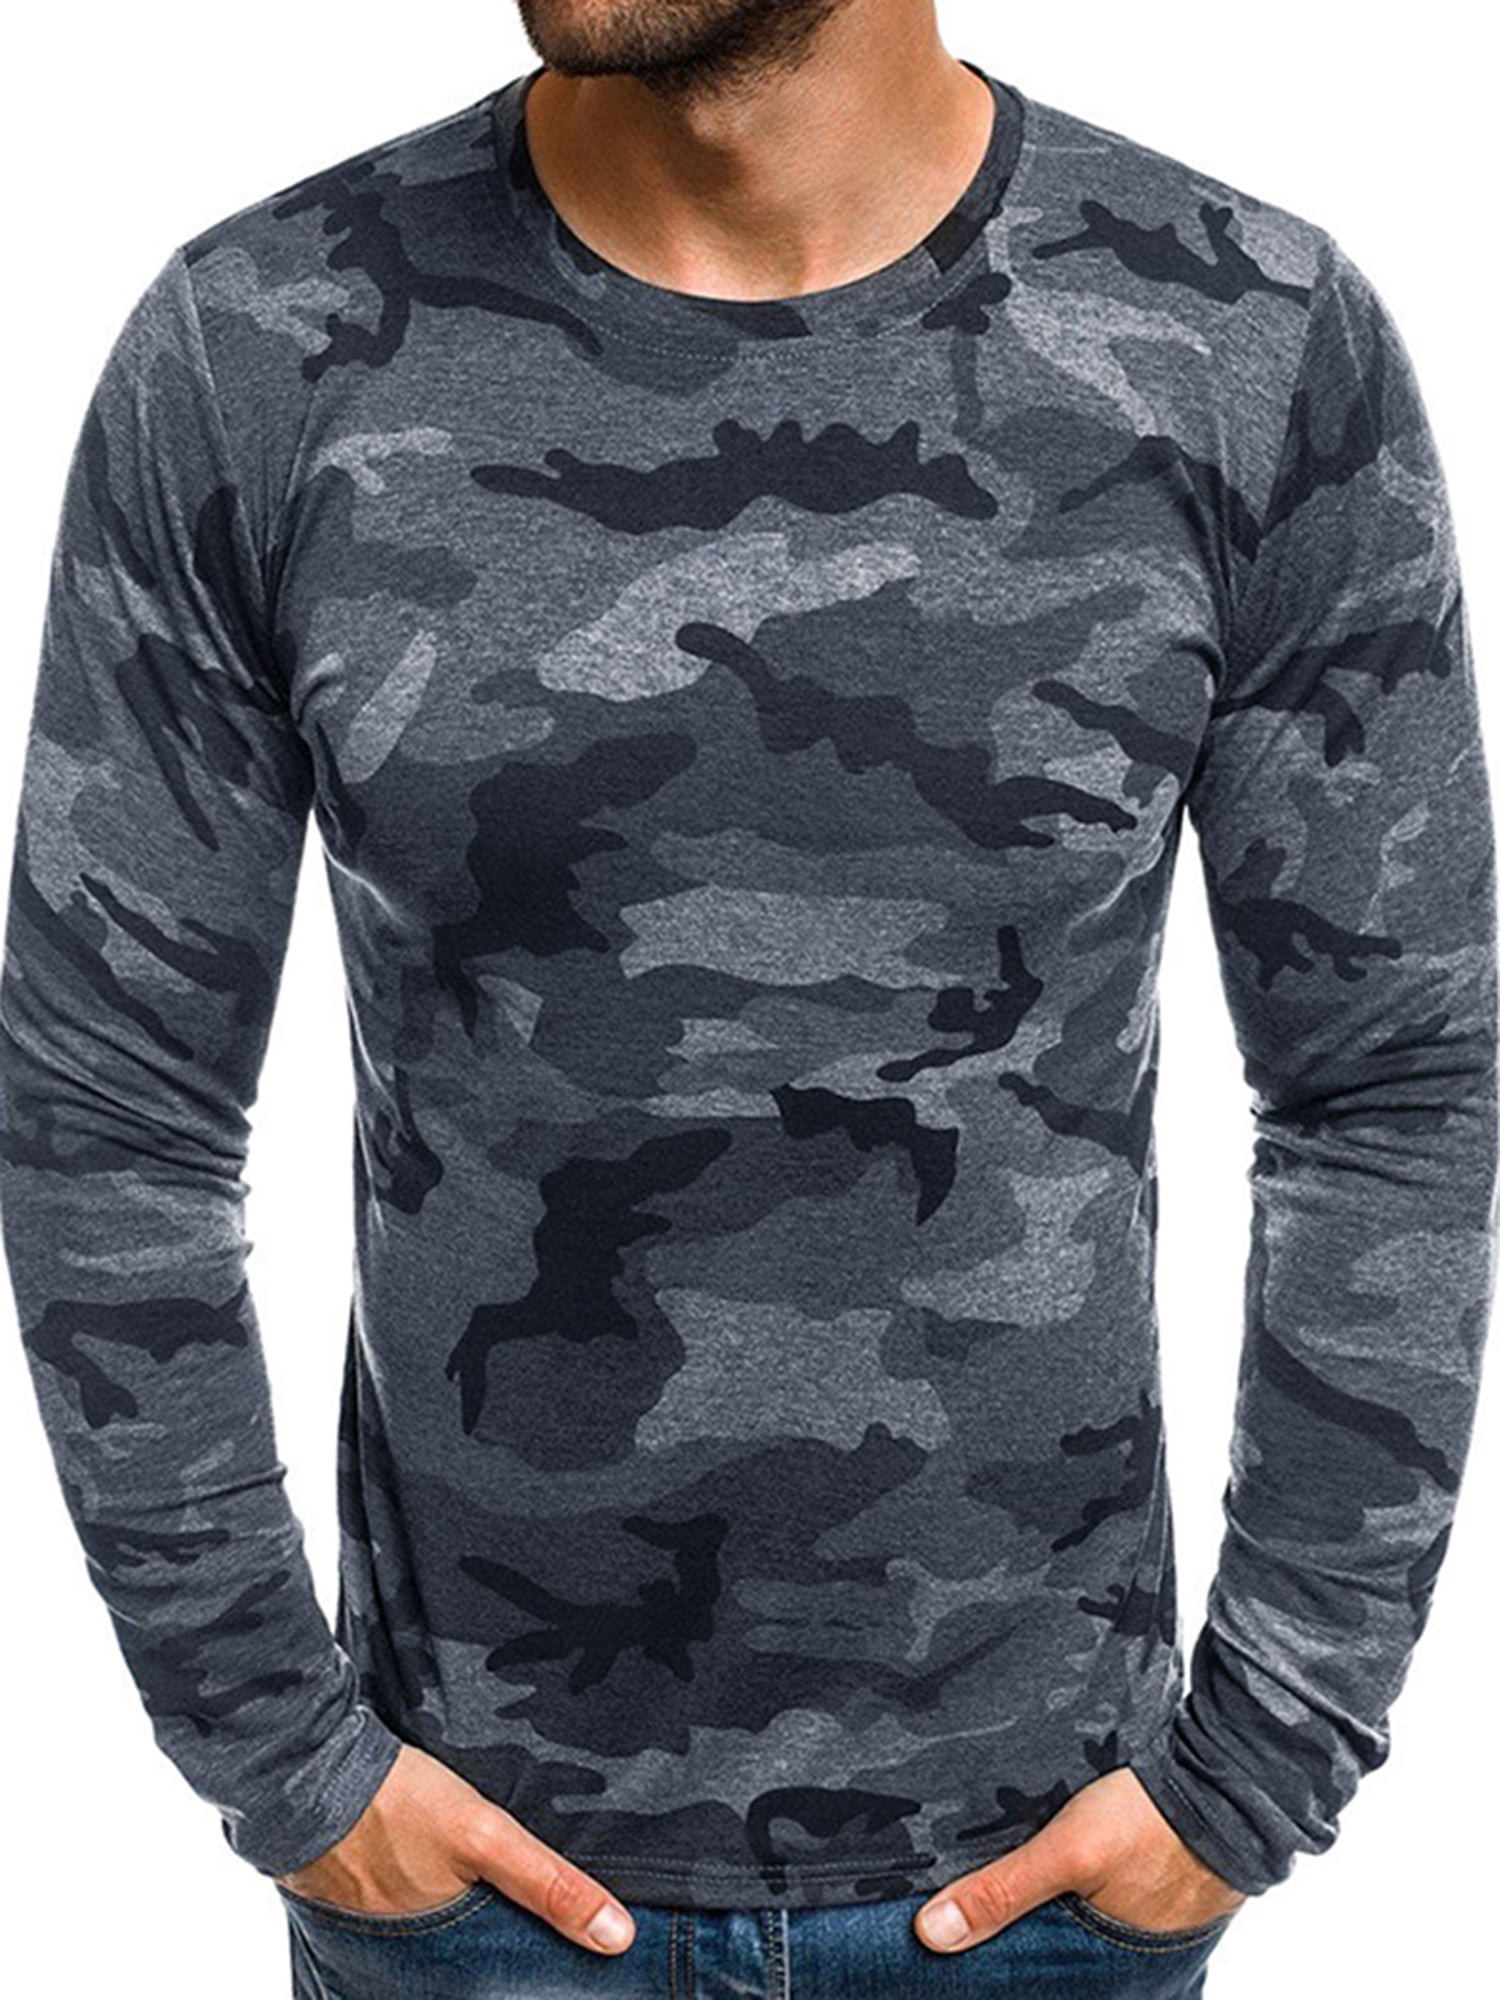 Mens Tactical Lightweight Sleeve Cotton Camo Hiking Work Shirts,Graycamouflage,S 